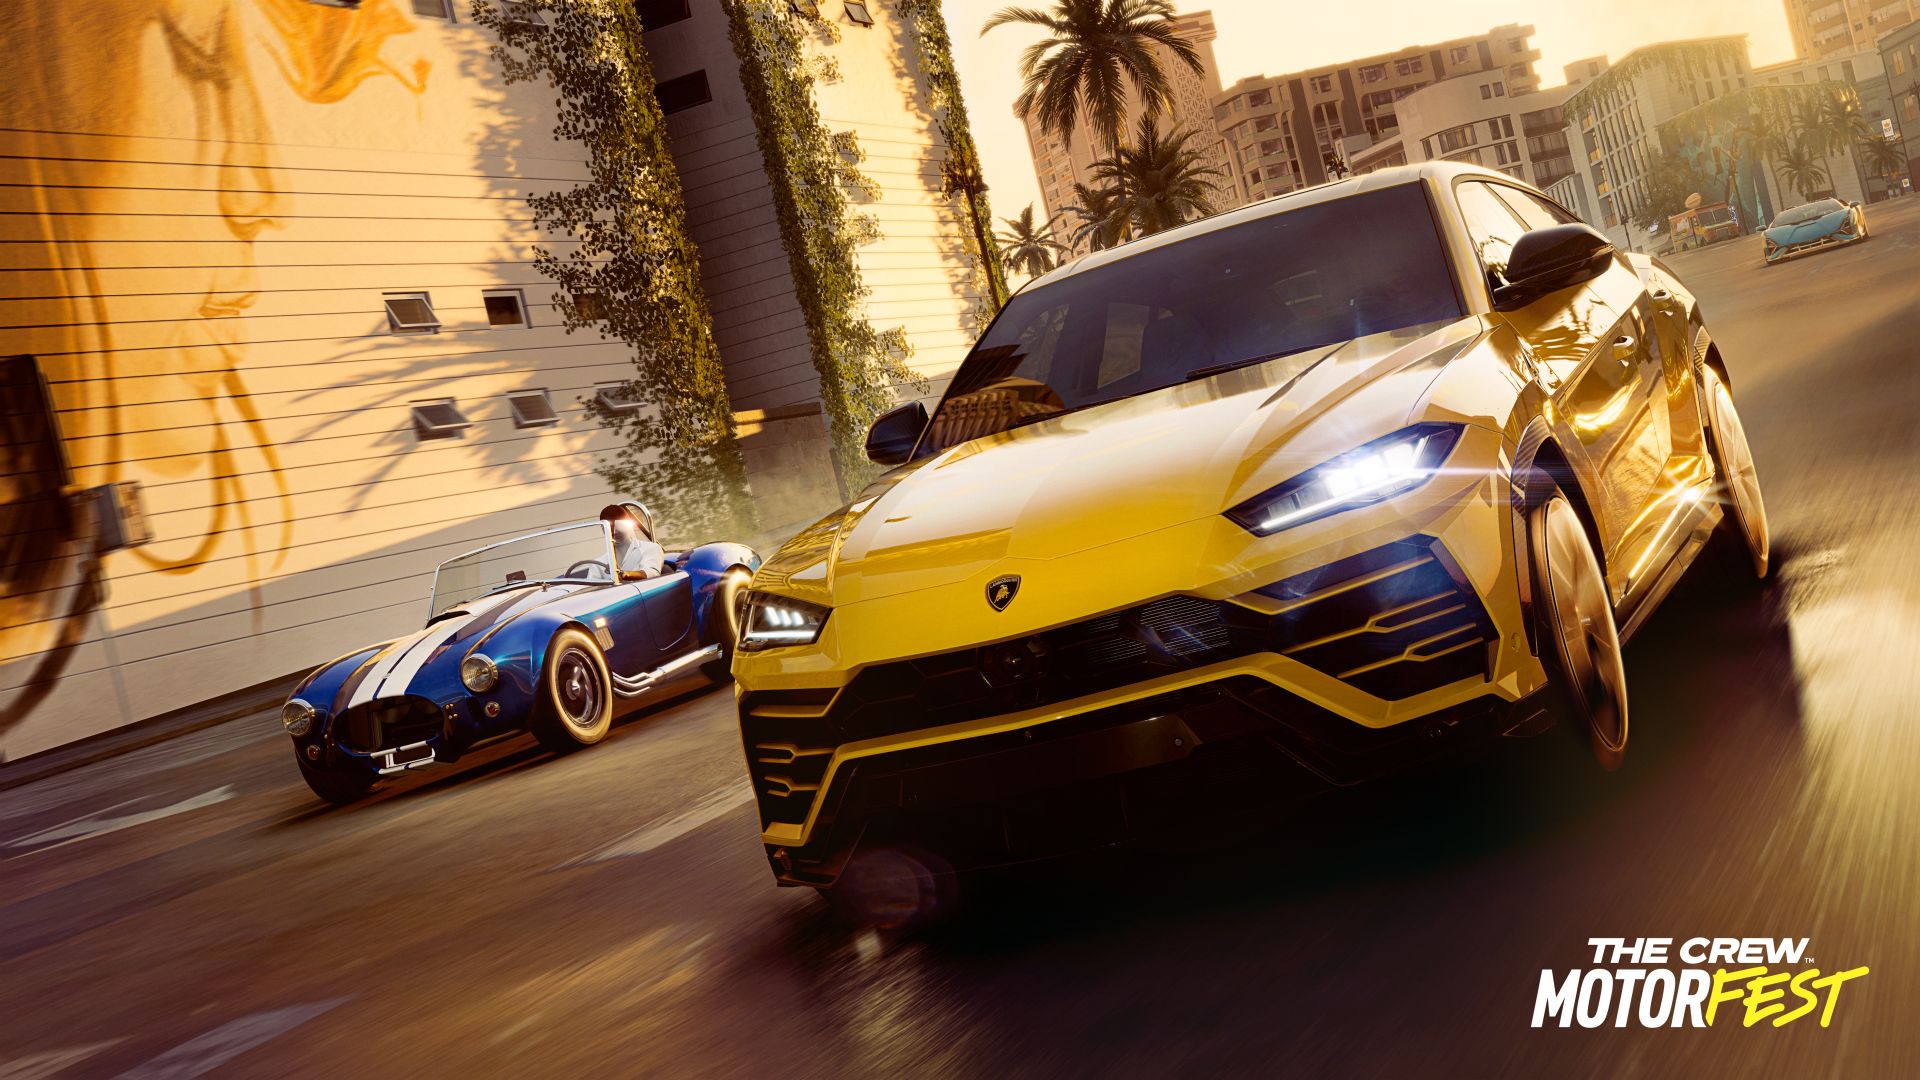 The Crew Motorfest is announced for 2023 on Xbox, PlayStation and PC